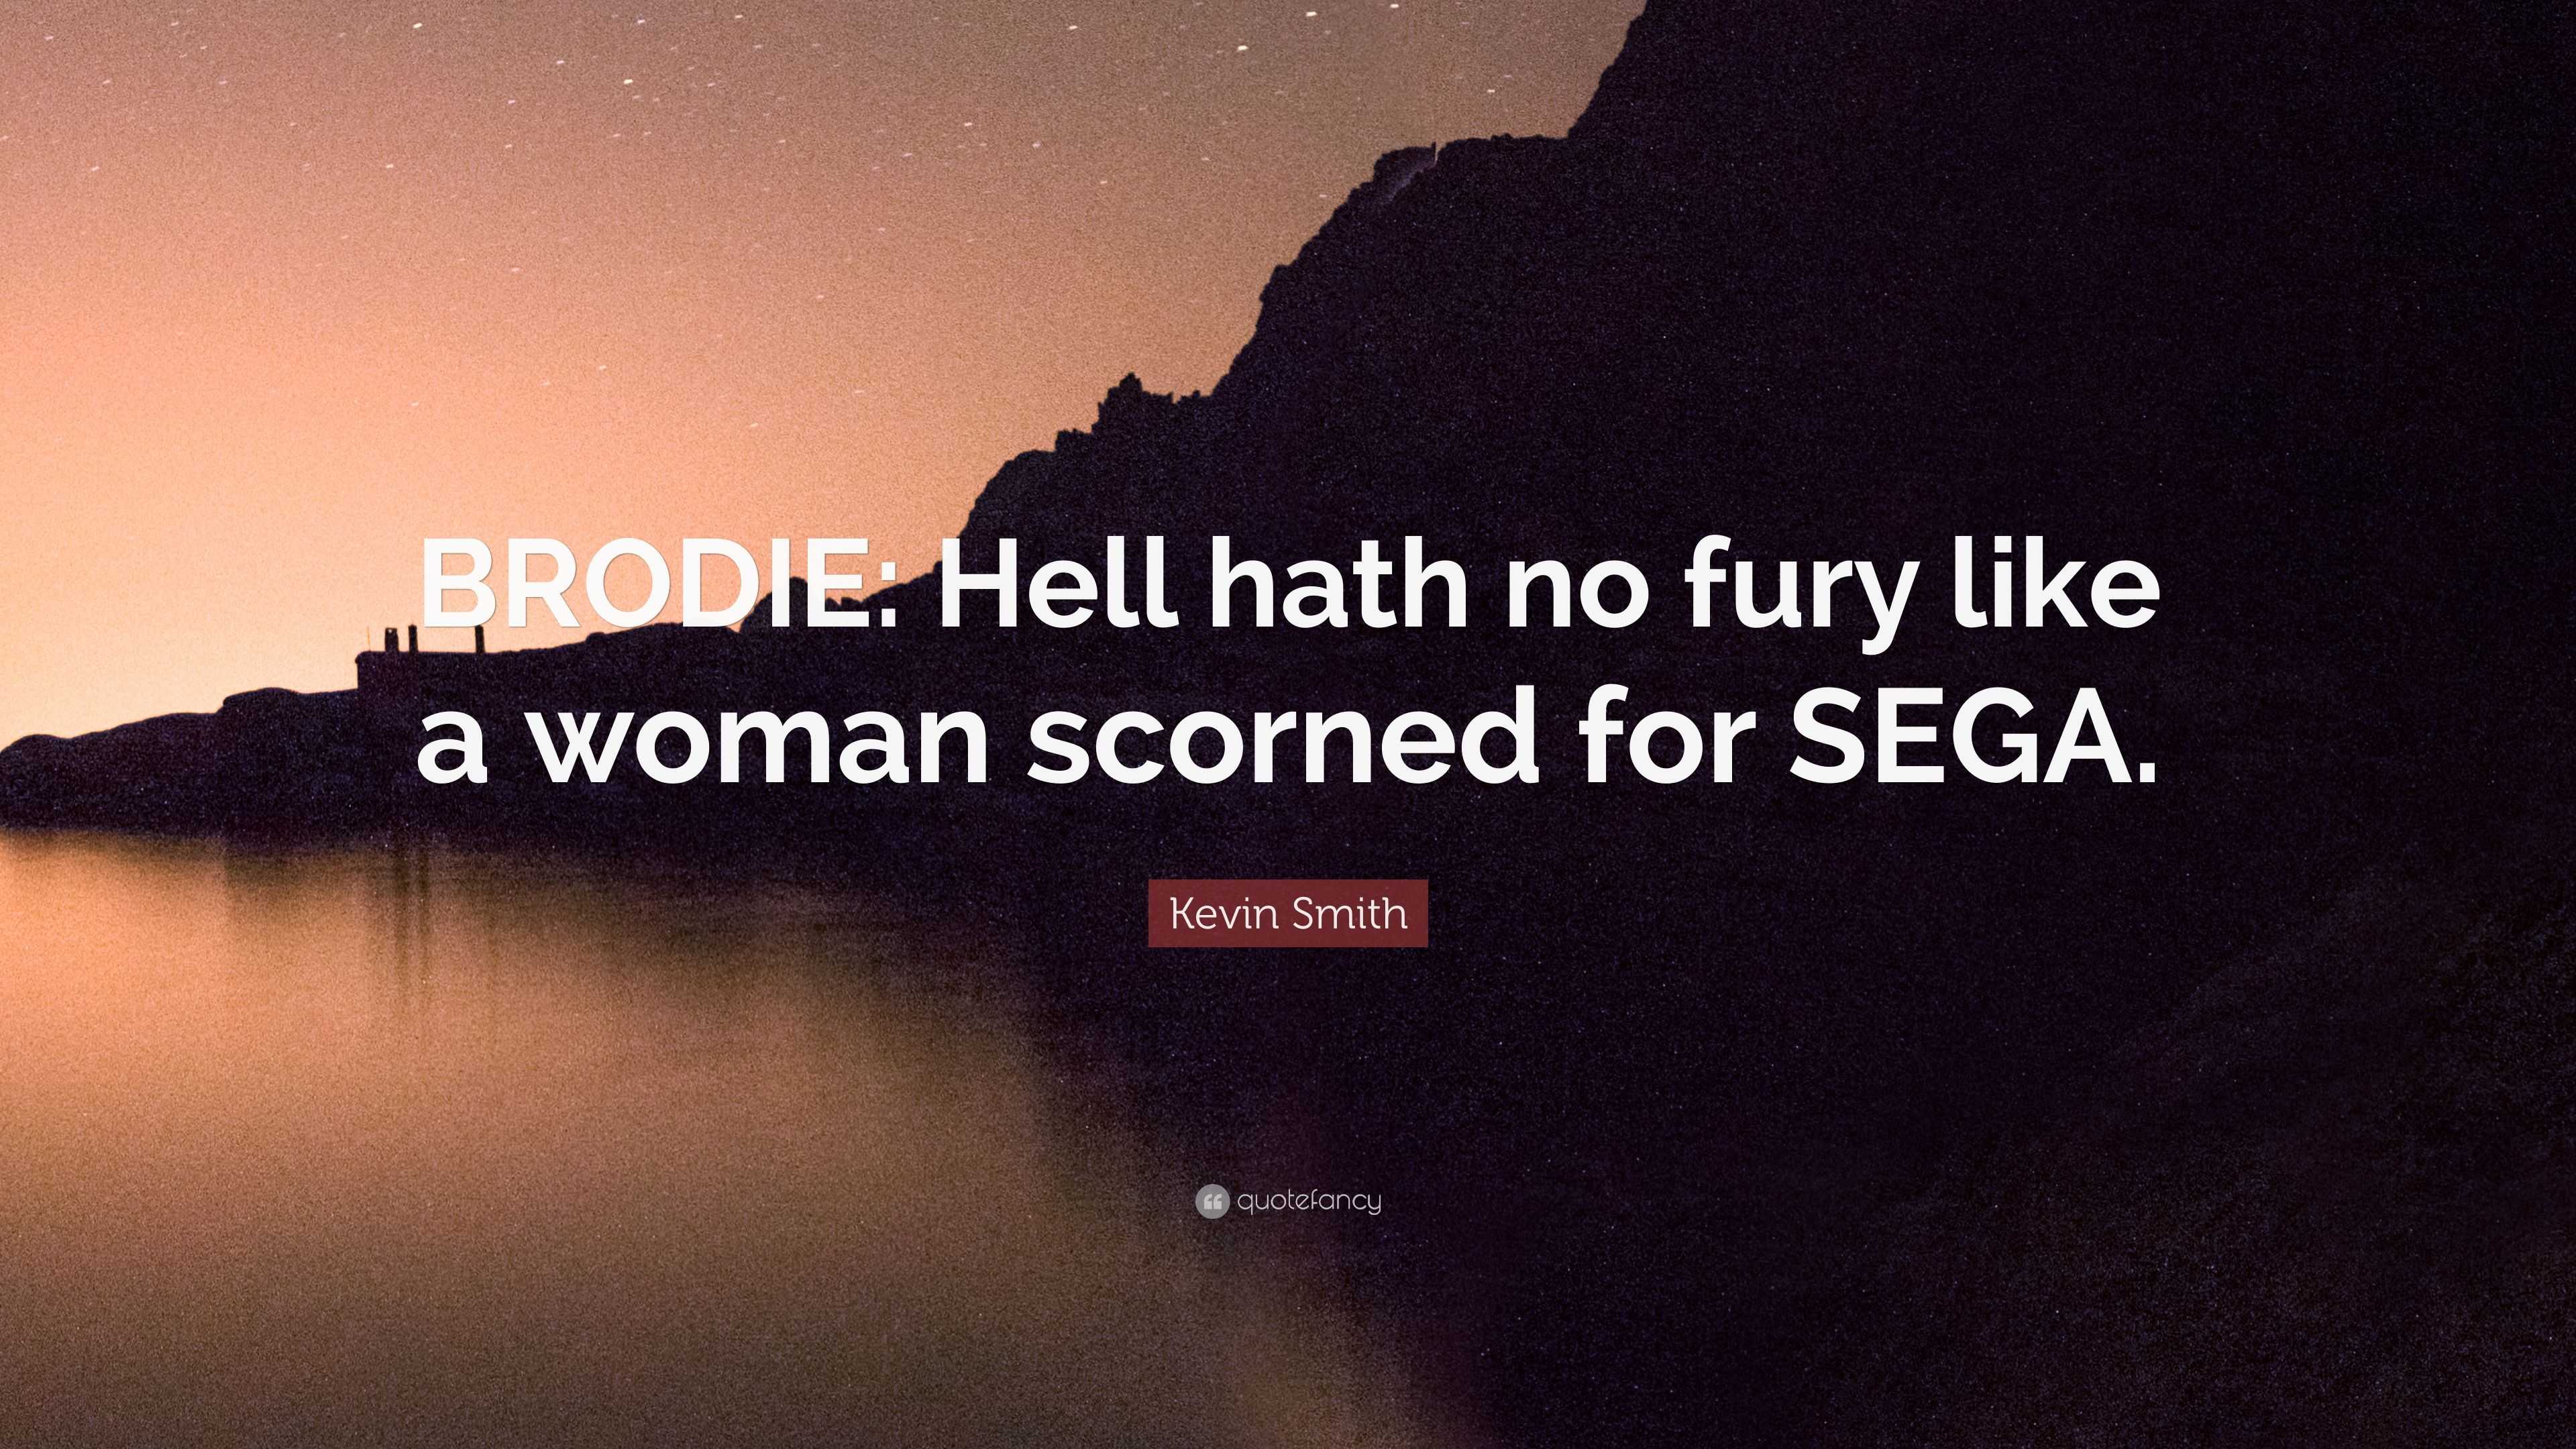 Kevin Smith Quote “brodie Hell Hath No Fury Like A Woman Scorned For Sega ”